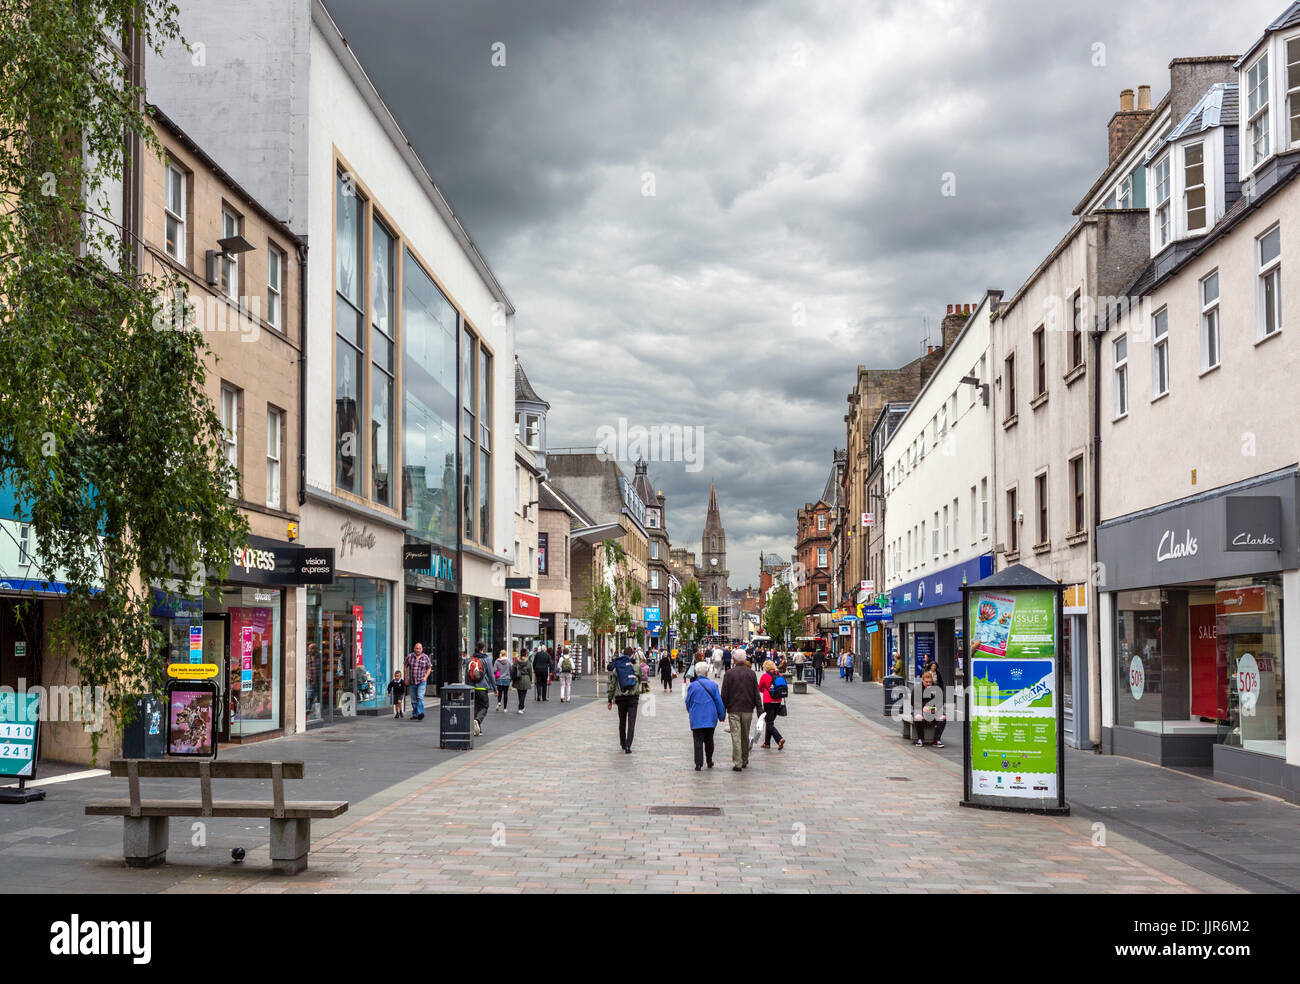 Shops on the High Street in the town centre, Perth, Scotland, UK Stock Photo